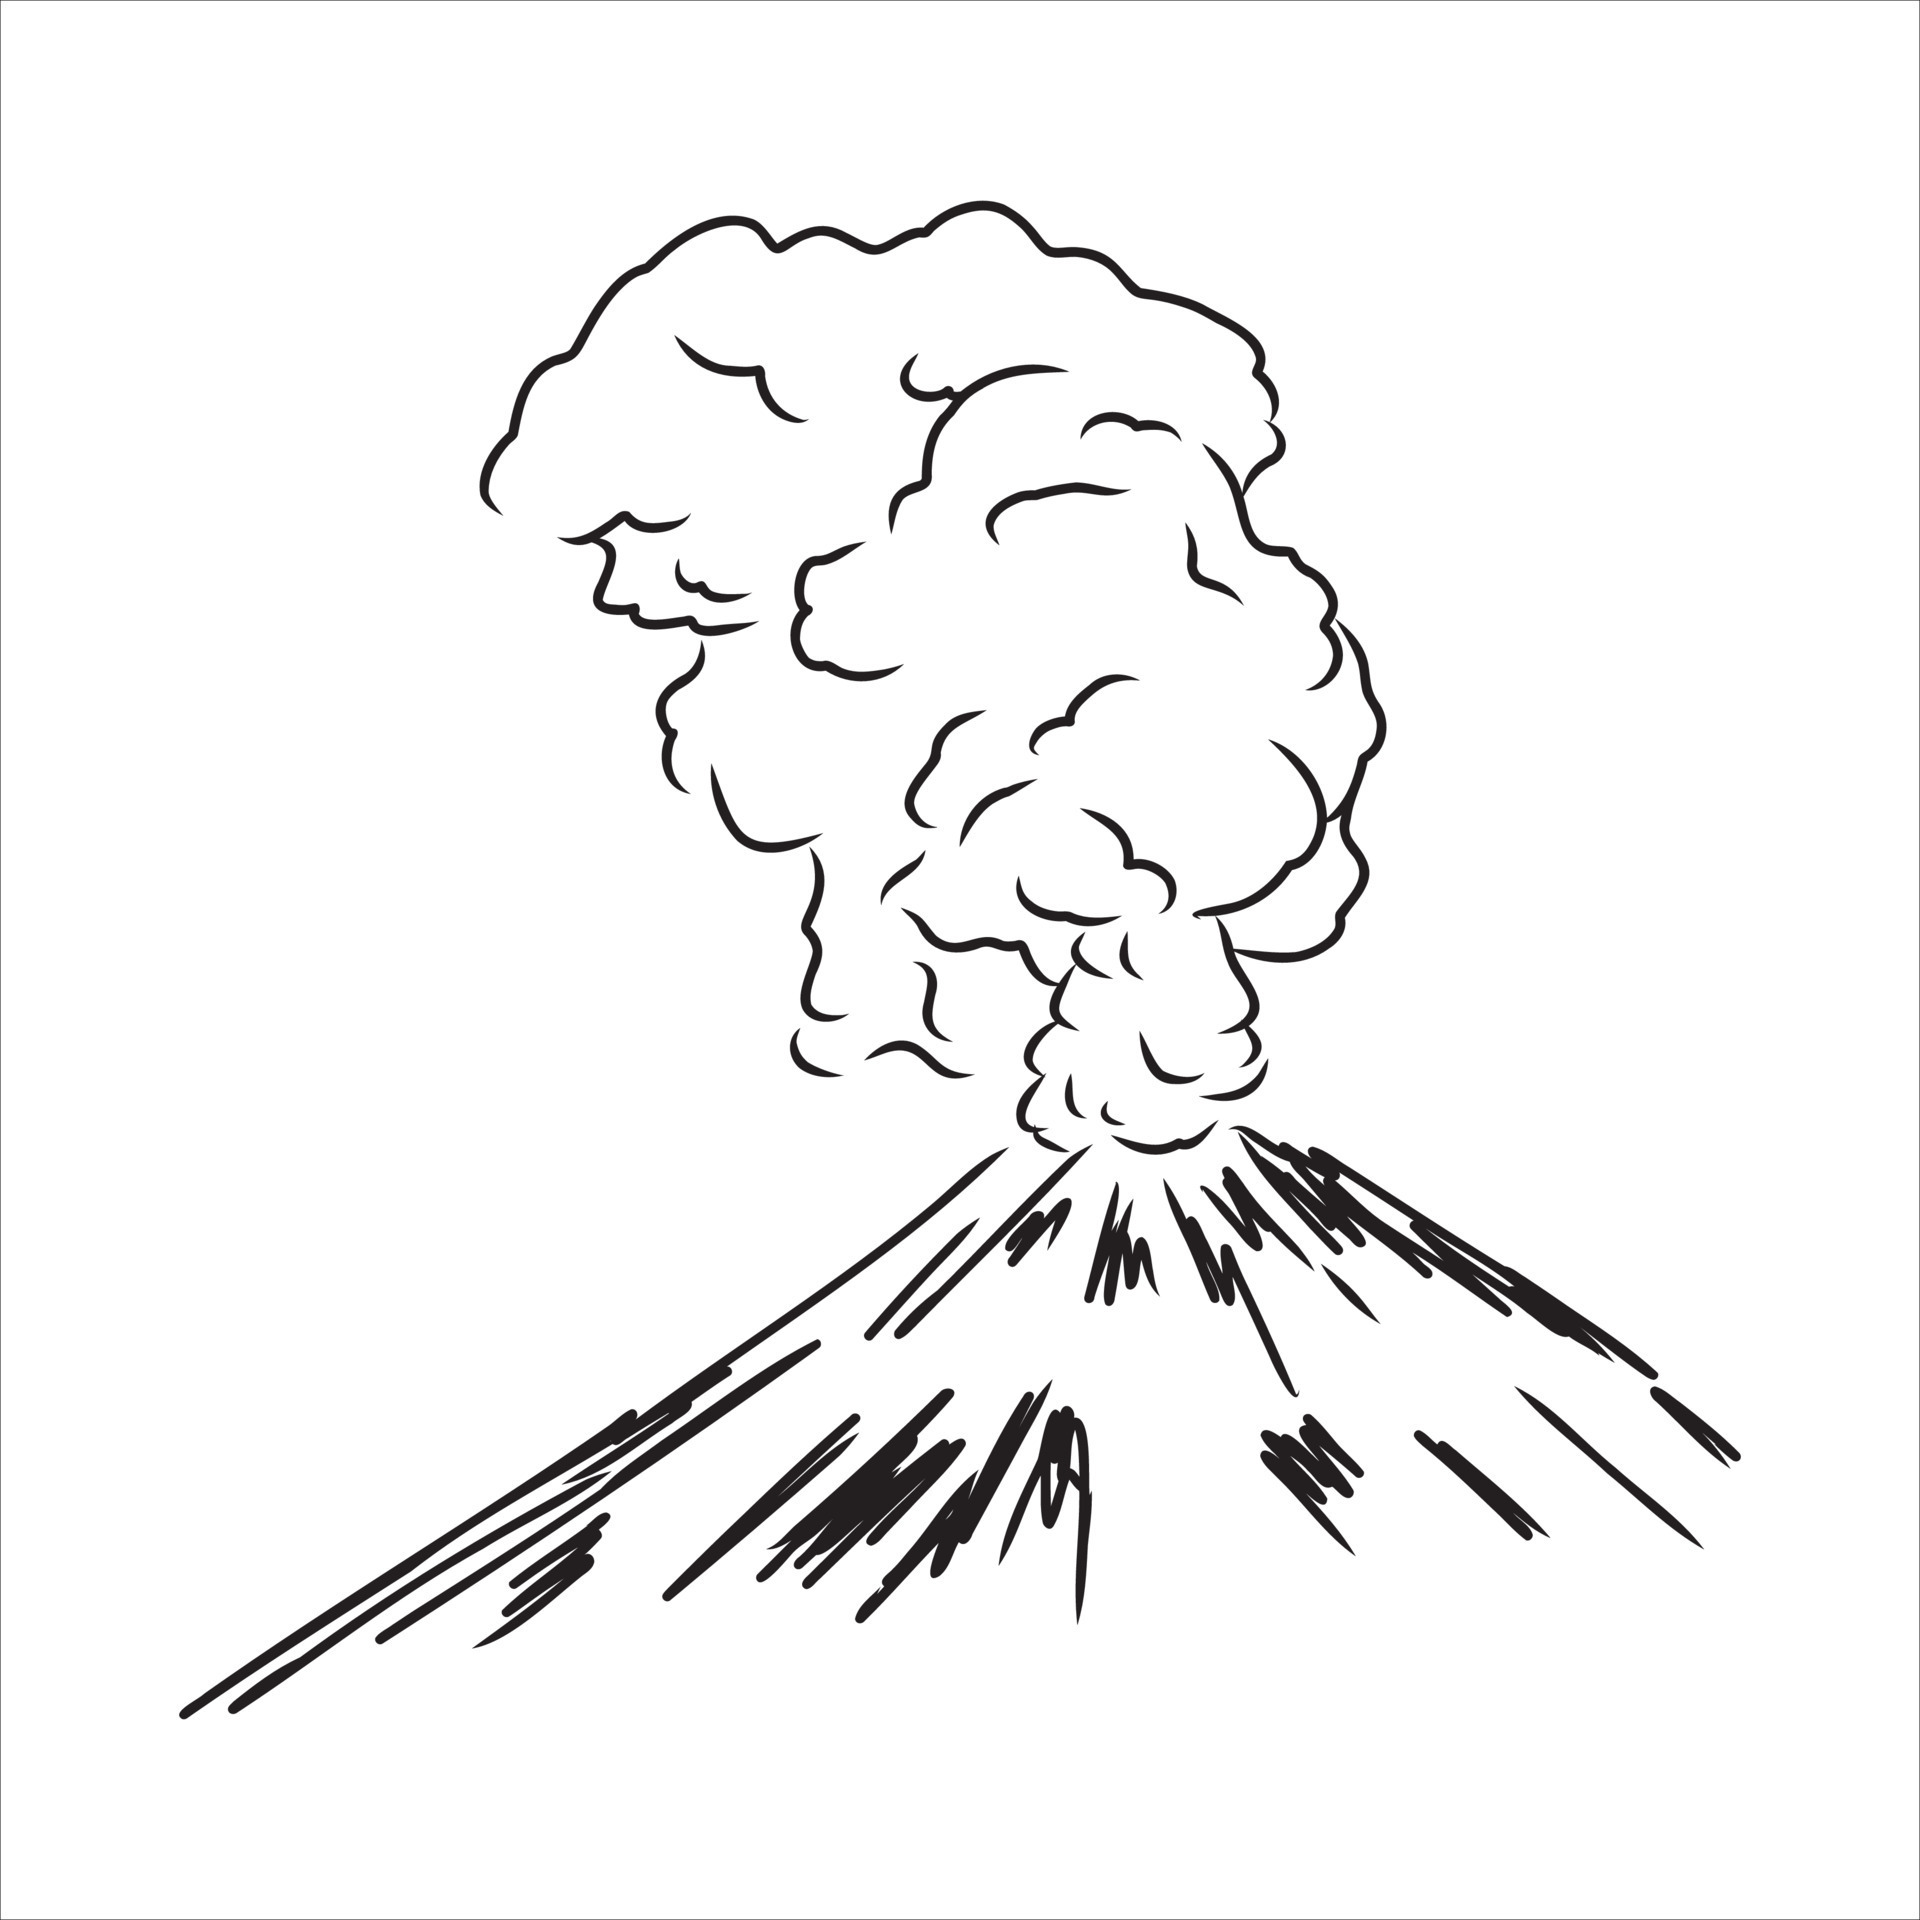 Volcano Illustrations and Clip Art 18063 Volcano royalty free  illustrations drawings and graphics available to search from thousands of  vector EPS clipart producers